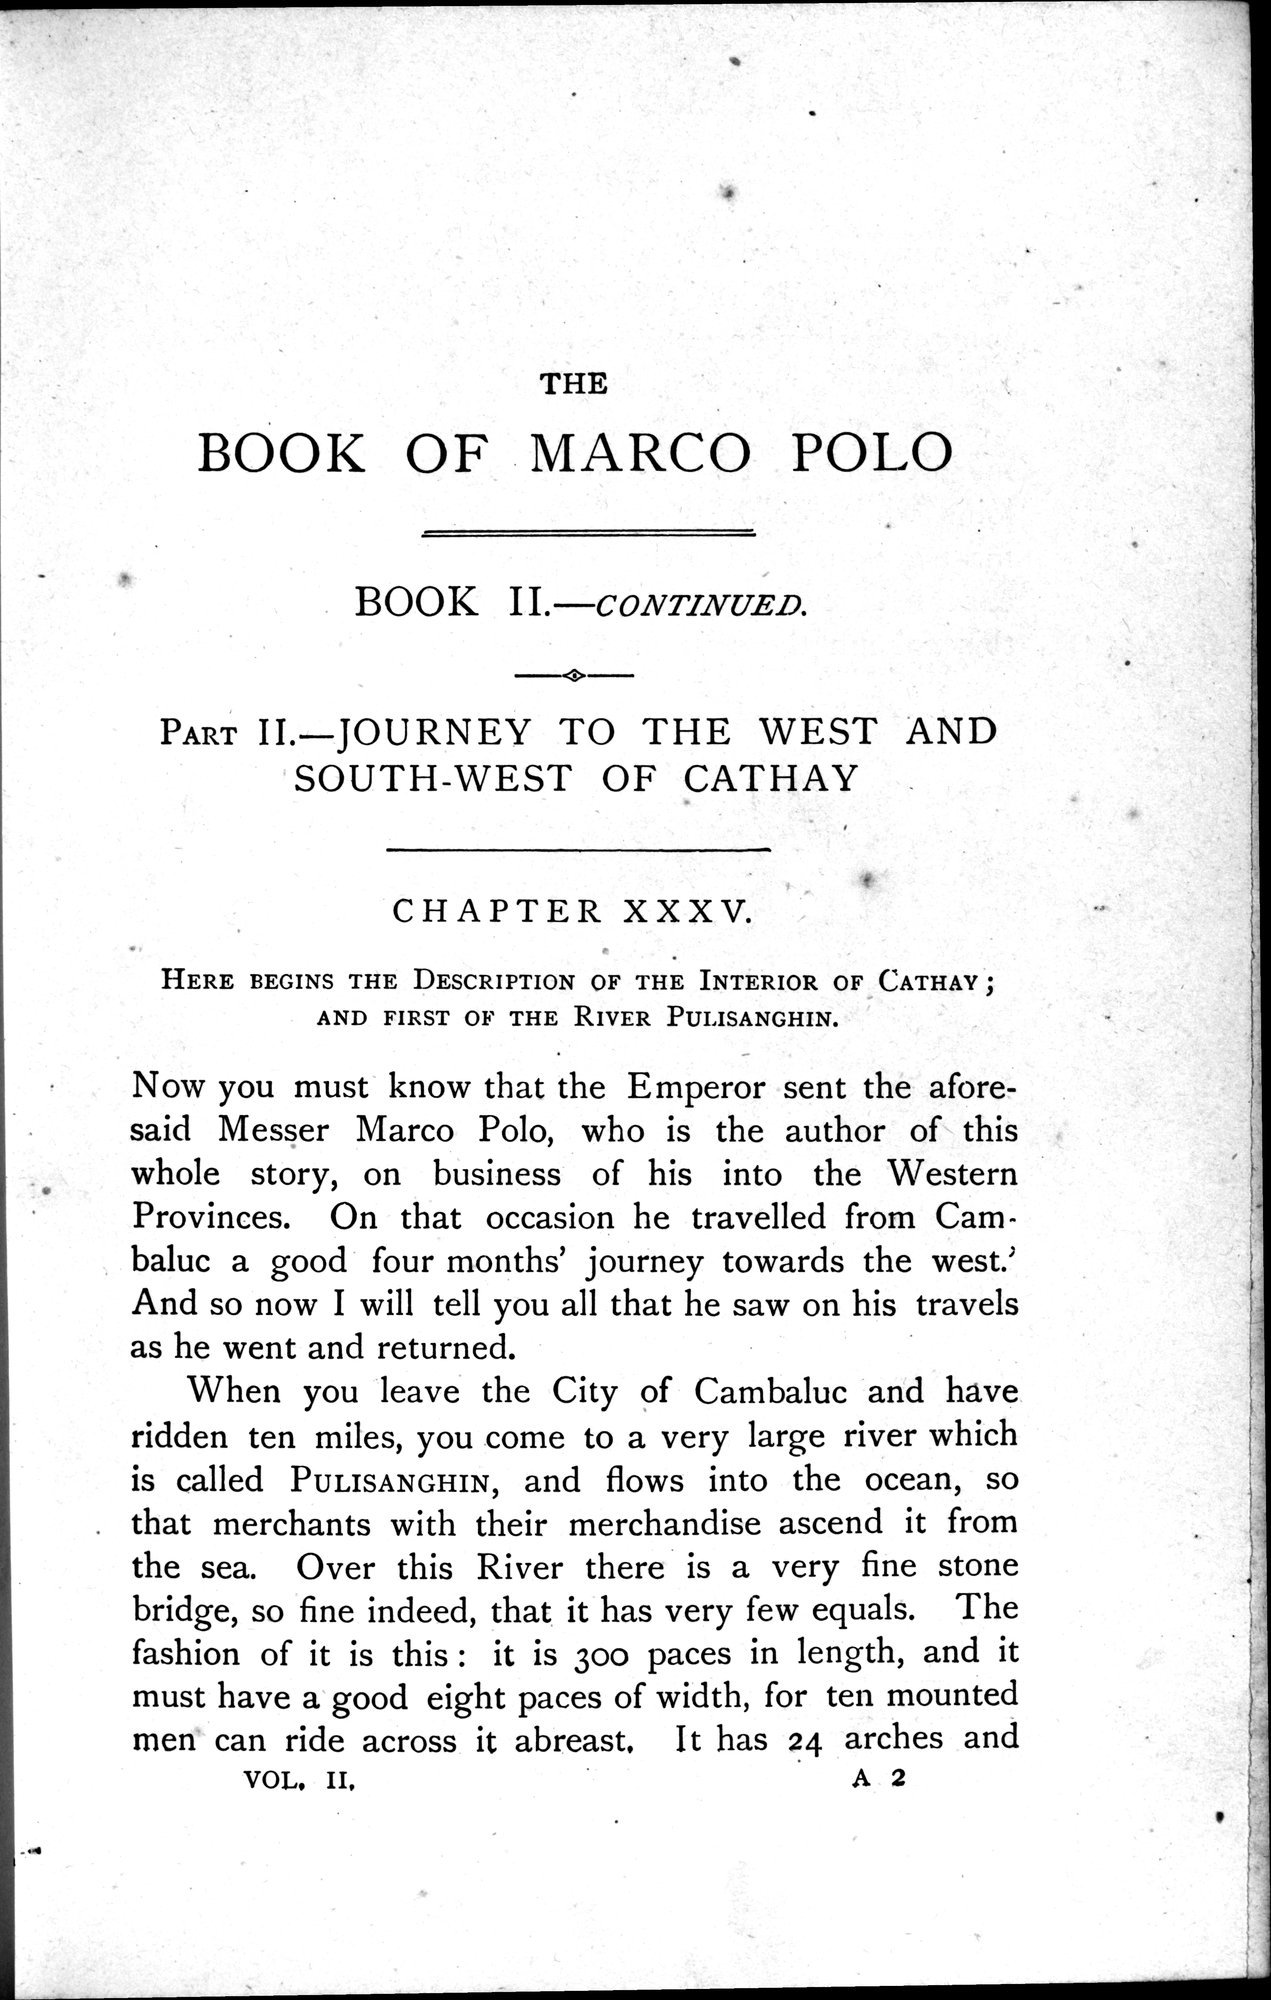 The Book of Ser Marco Polo : vol.2 / 35 ページ（白黒高解像度画像）